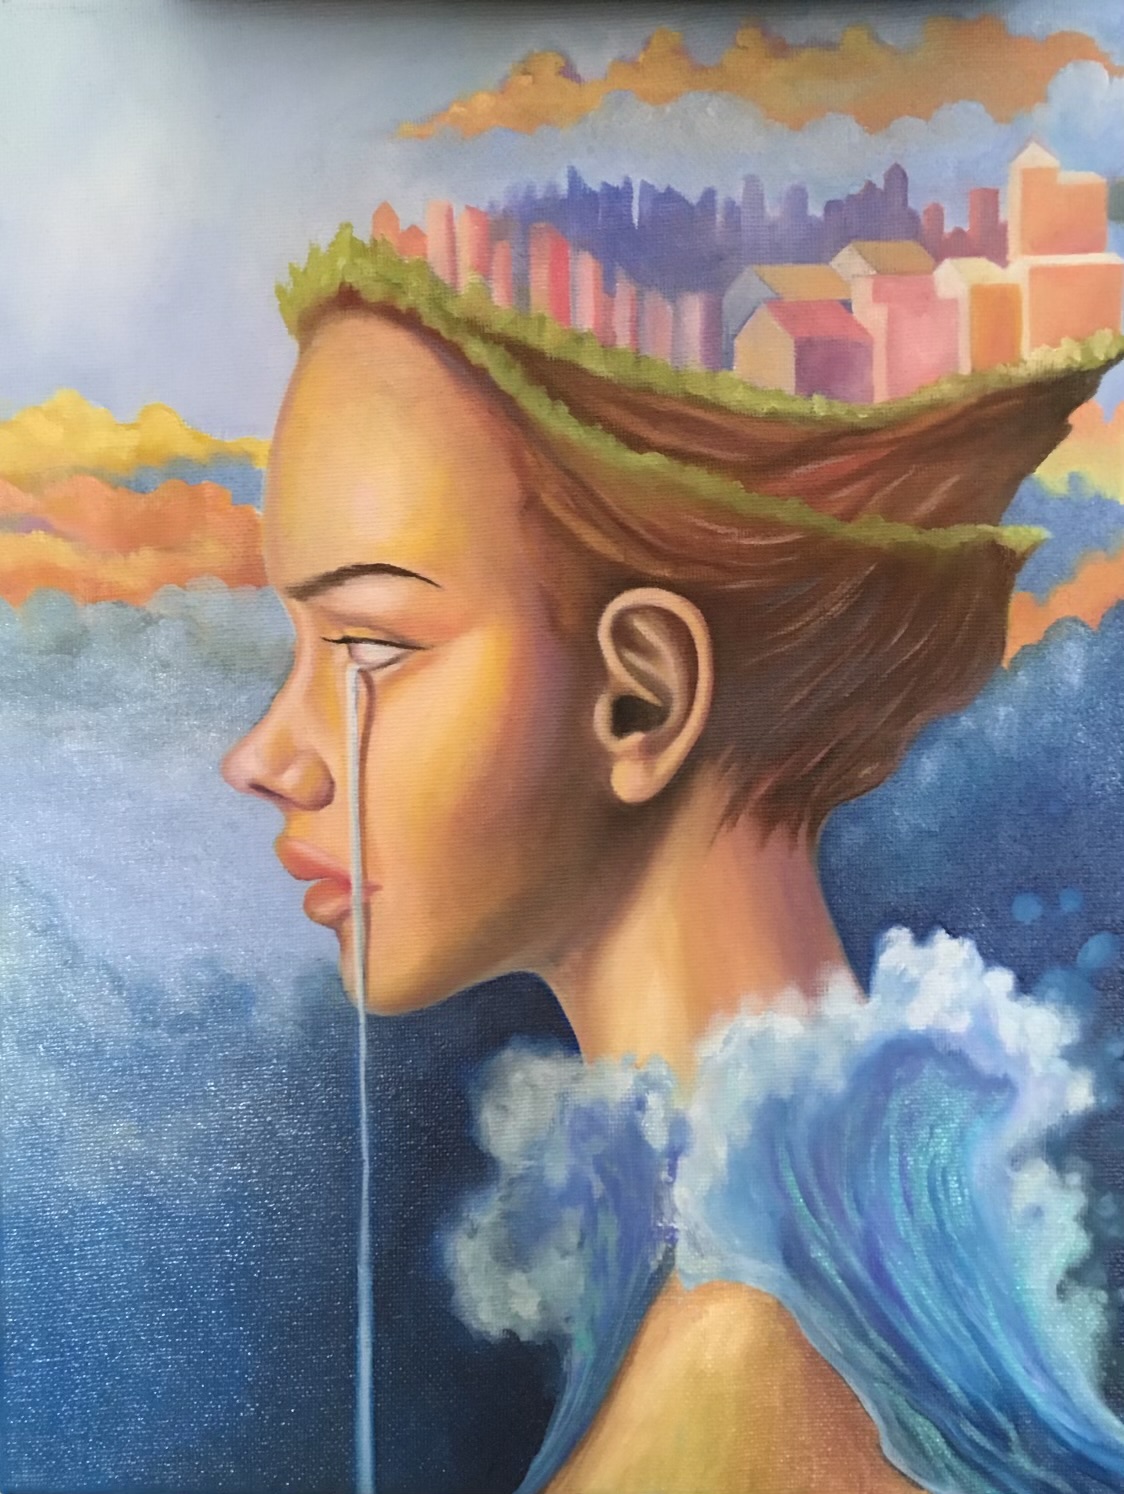 A painting of a woman crying. Above her head is a cityscape